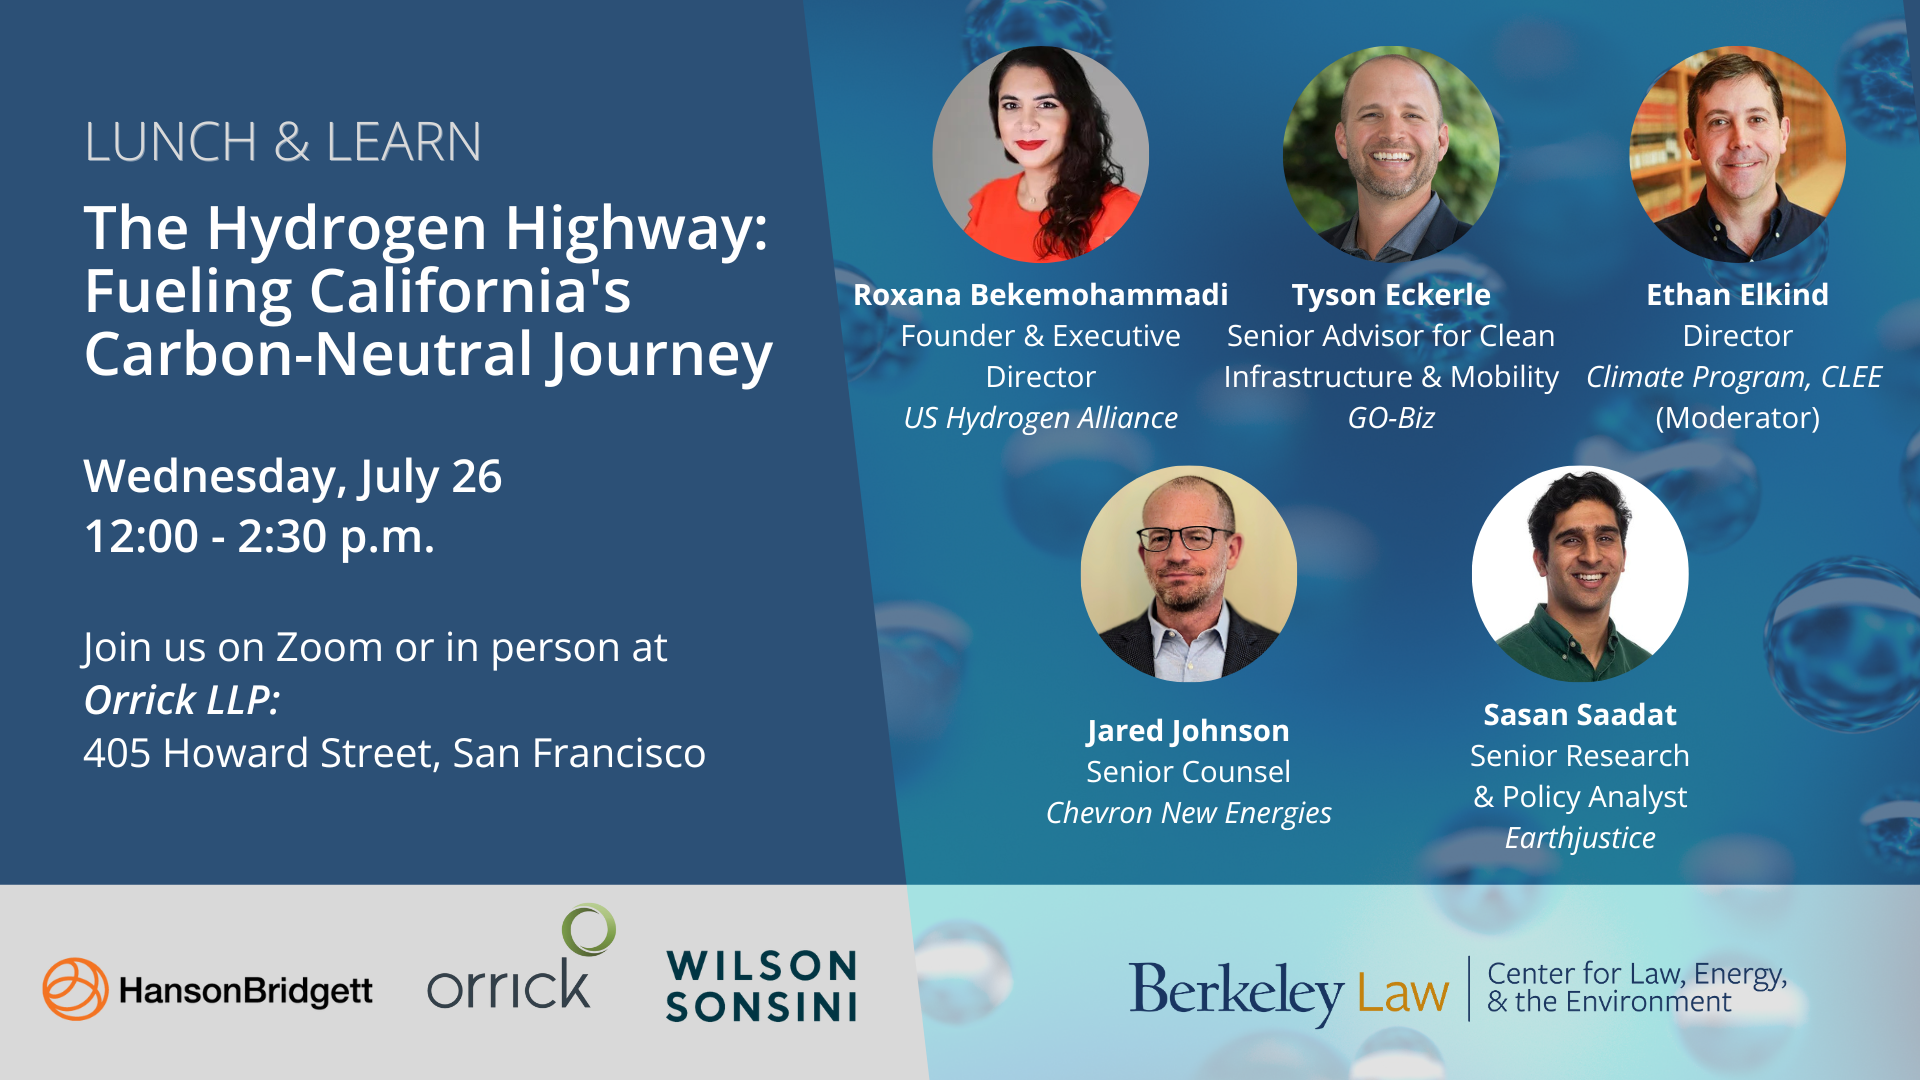 Flyer with headshots of panelists, titled 'The Hydrogen Highway.' Event description text below image.